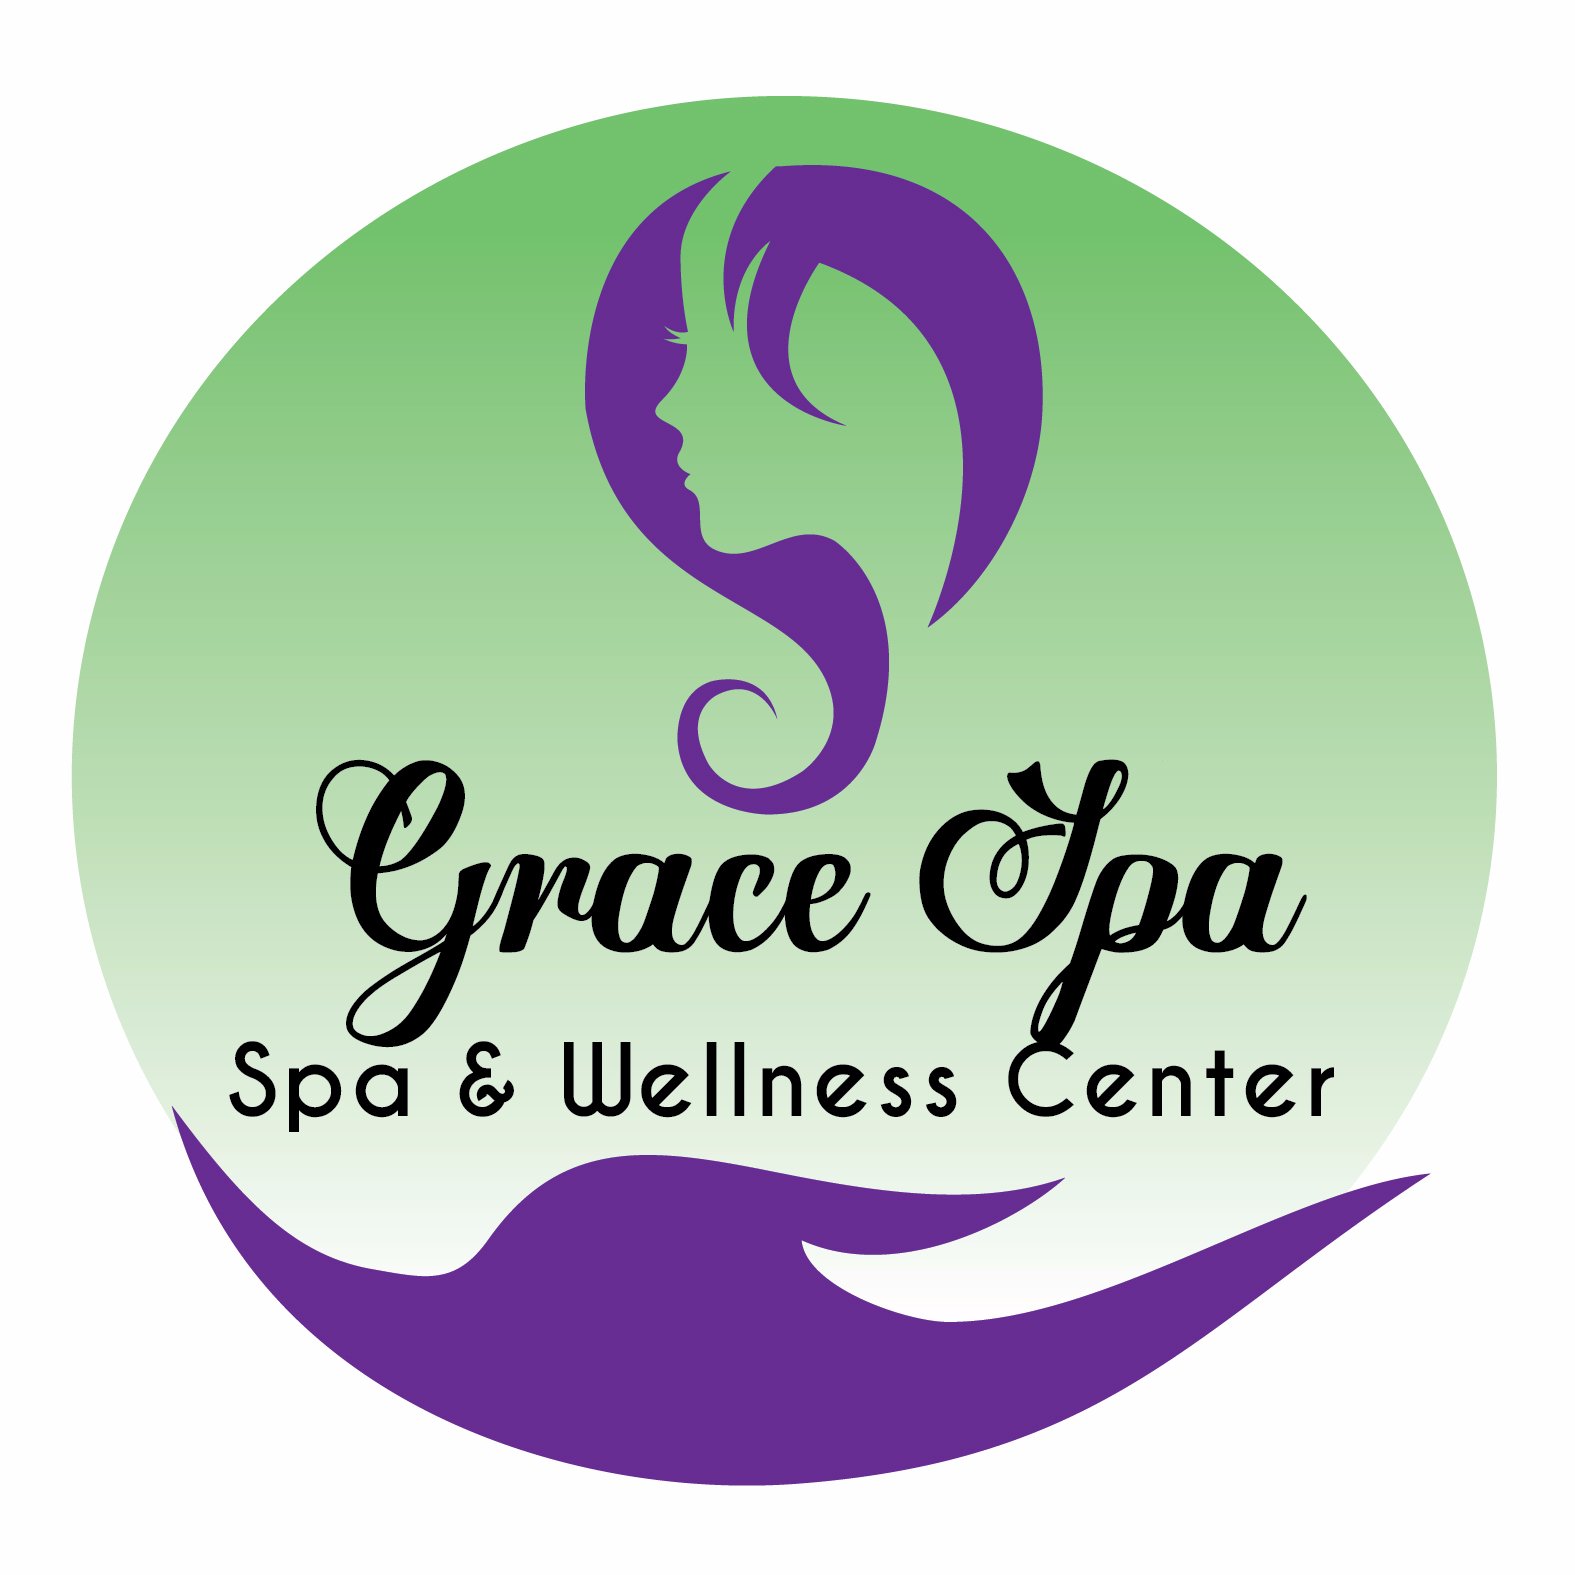 We are a spa and wellness center located in Edison, NJ. We offer skin care, facials, all types of waxing services, foot care, nail care, and more